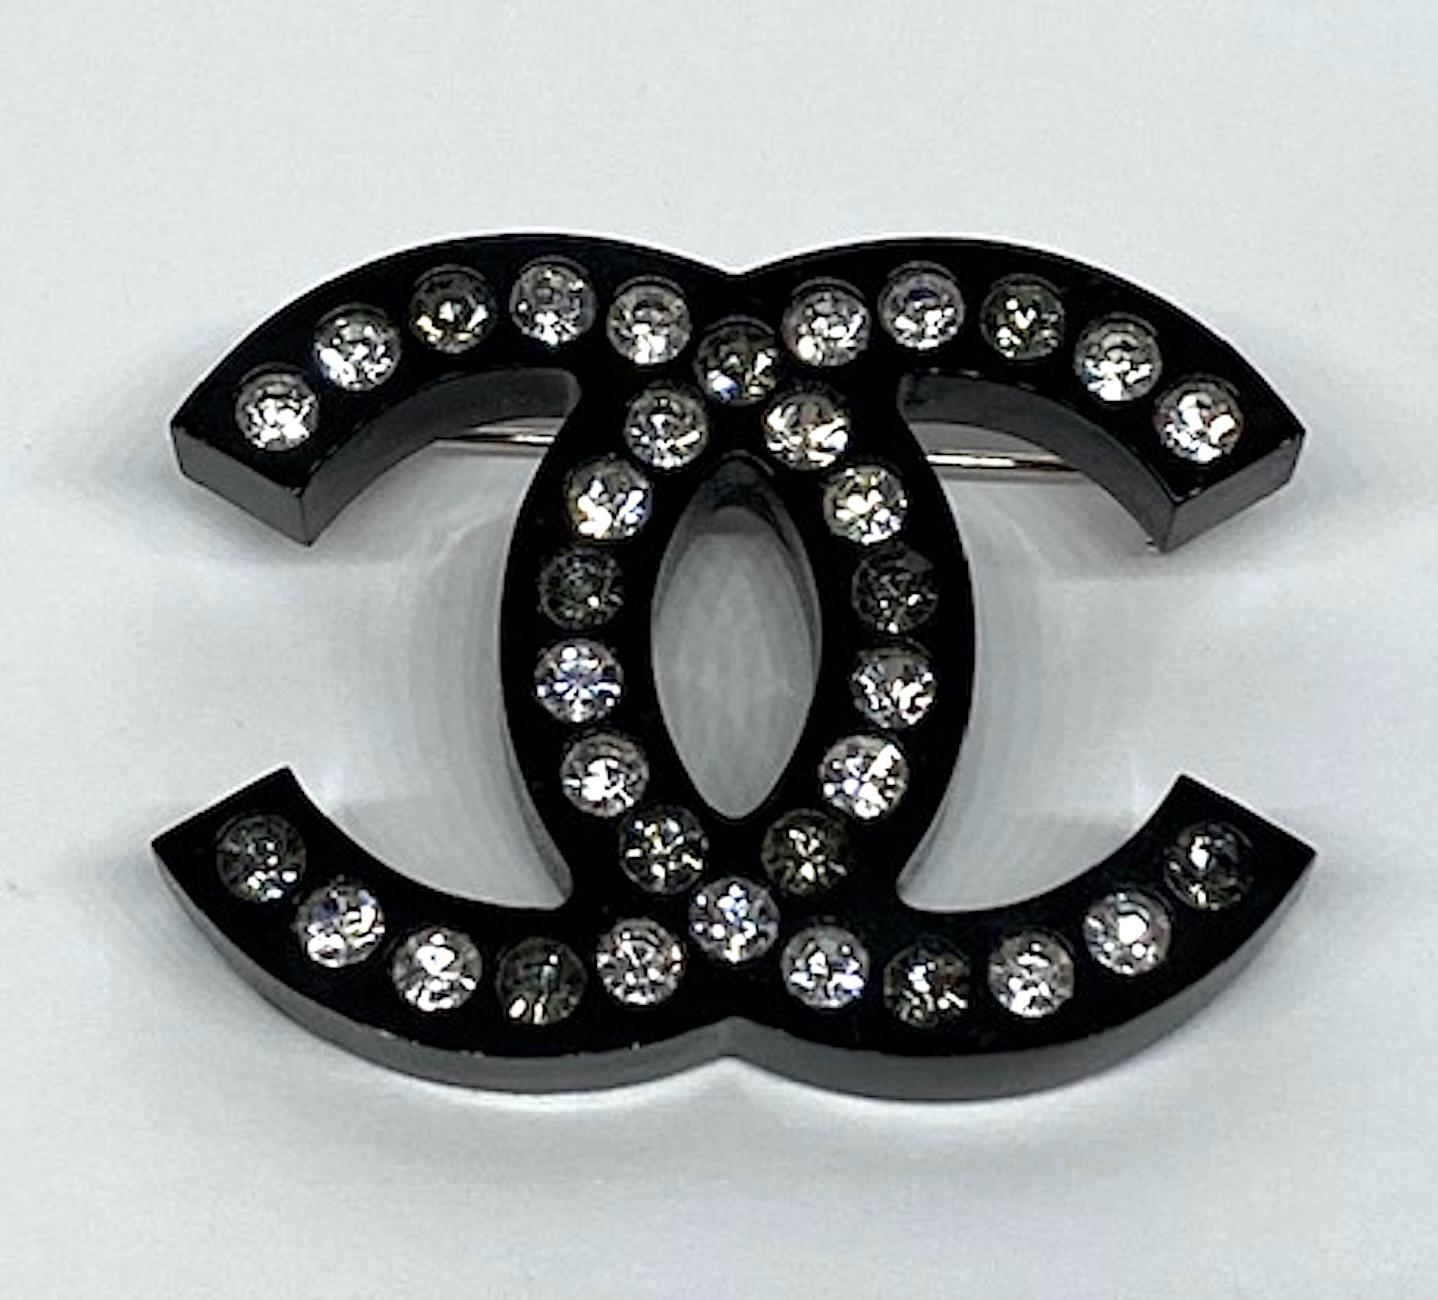 From the Spring Collection 2016 is this black lucite iconic Chanel interlocking CC logo pin set with clear and grey rhinestones. The black lucite is pin is 2 inches wide, 1.5 inches high and .25 on an inch thick. With the rhodium pin backing it is